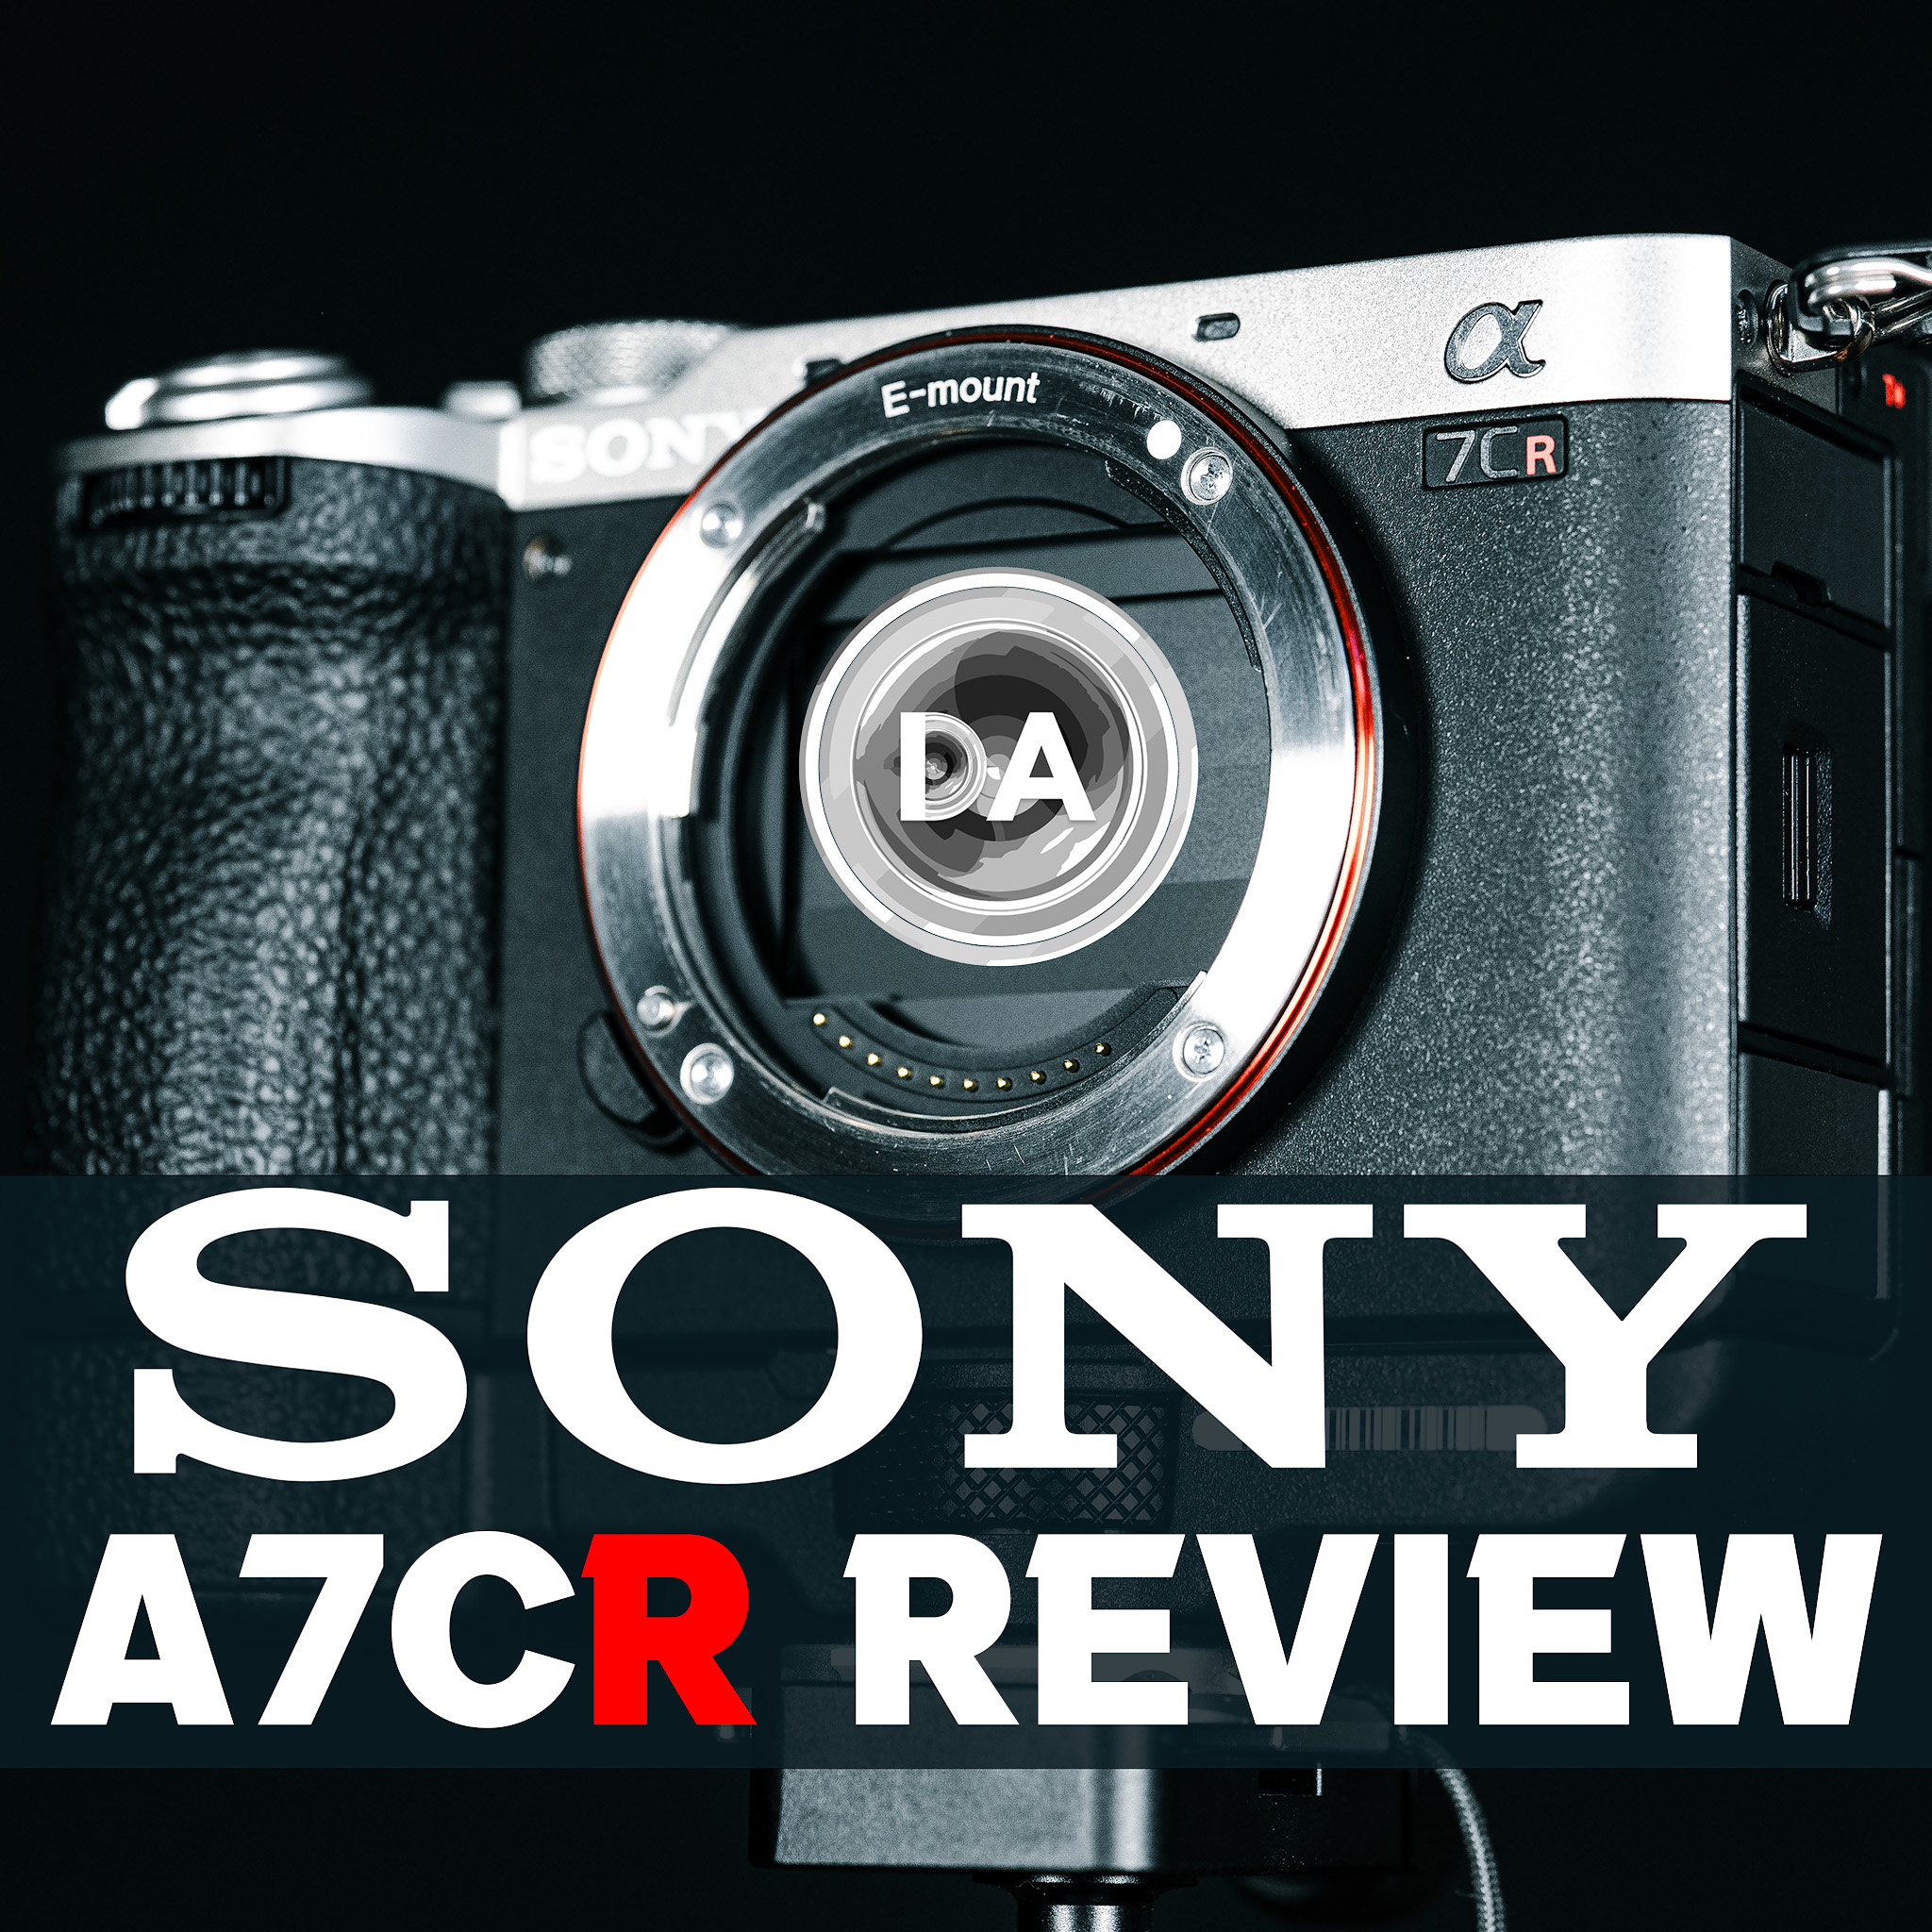 Sony A7R III announced with 4K HDR, ergonomic improvements - but no 10bit  or 4K60p! -  - Filmmaking Gear and Camera Reviews